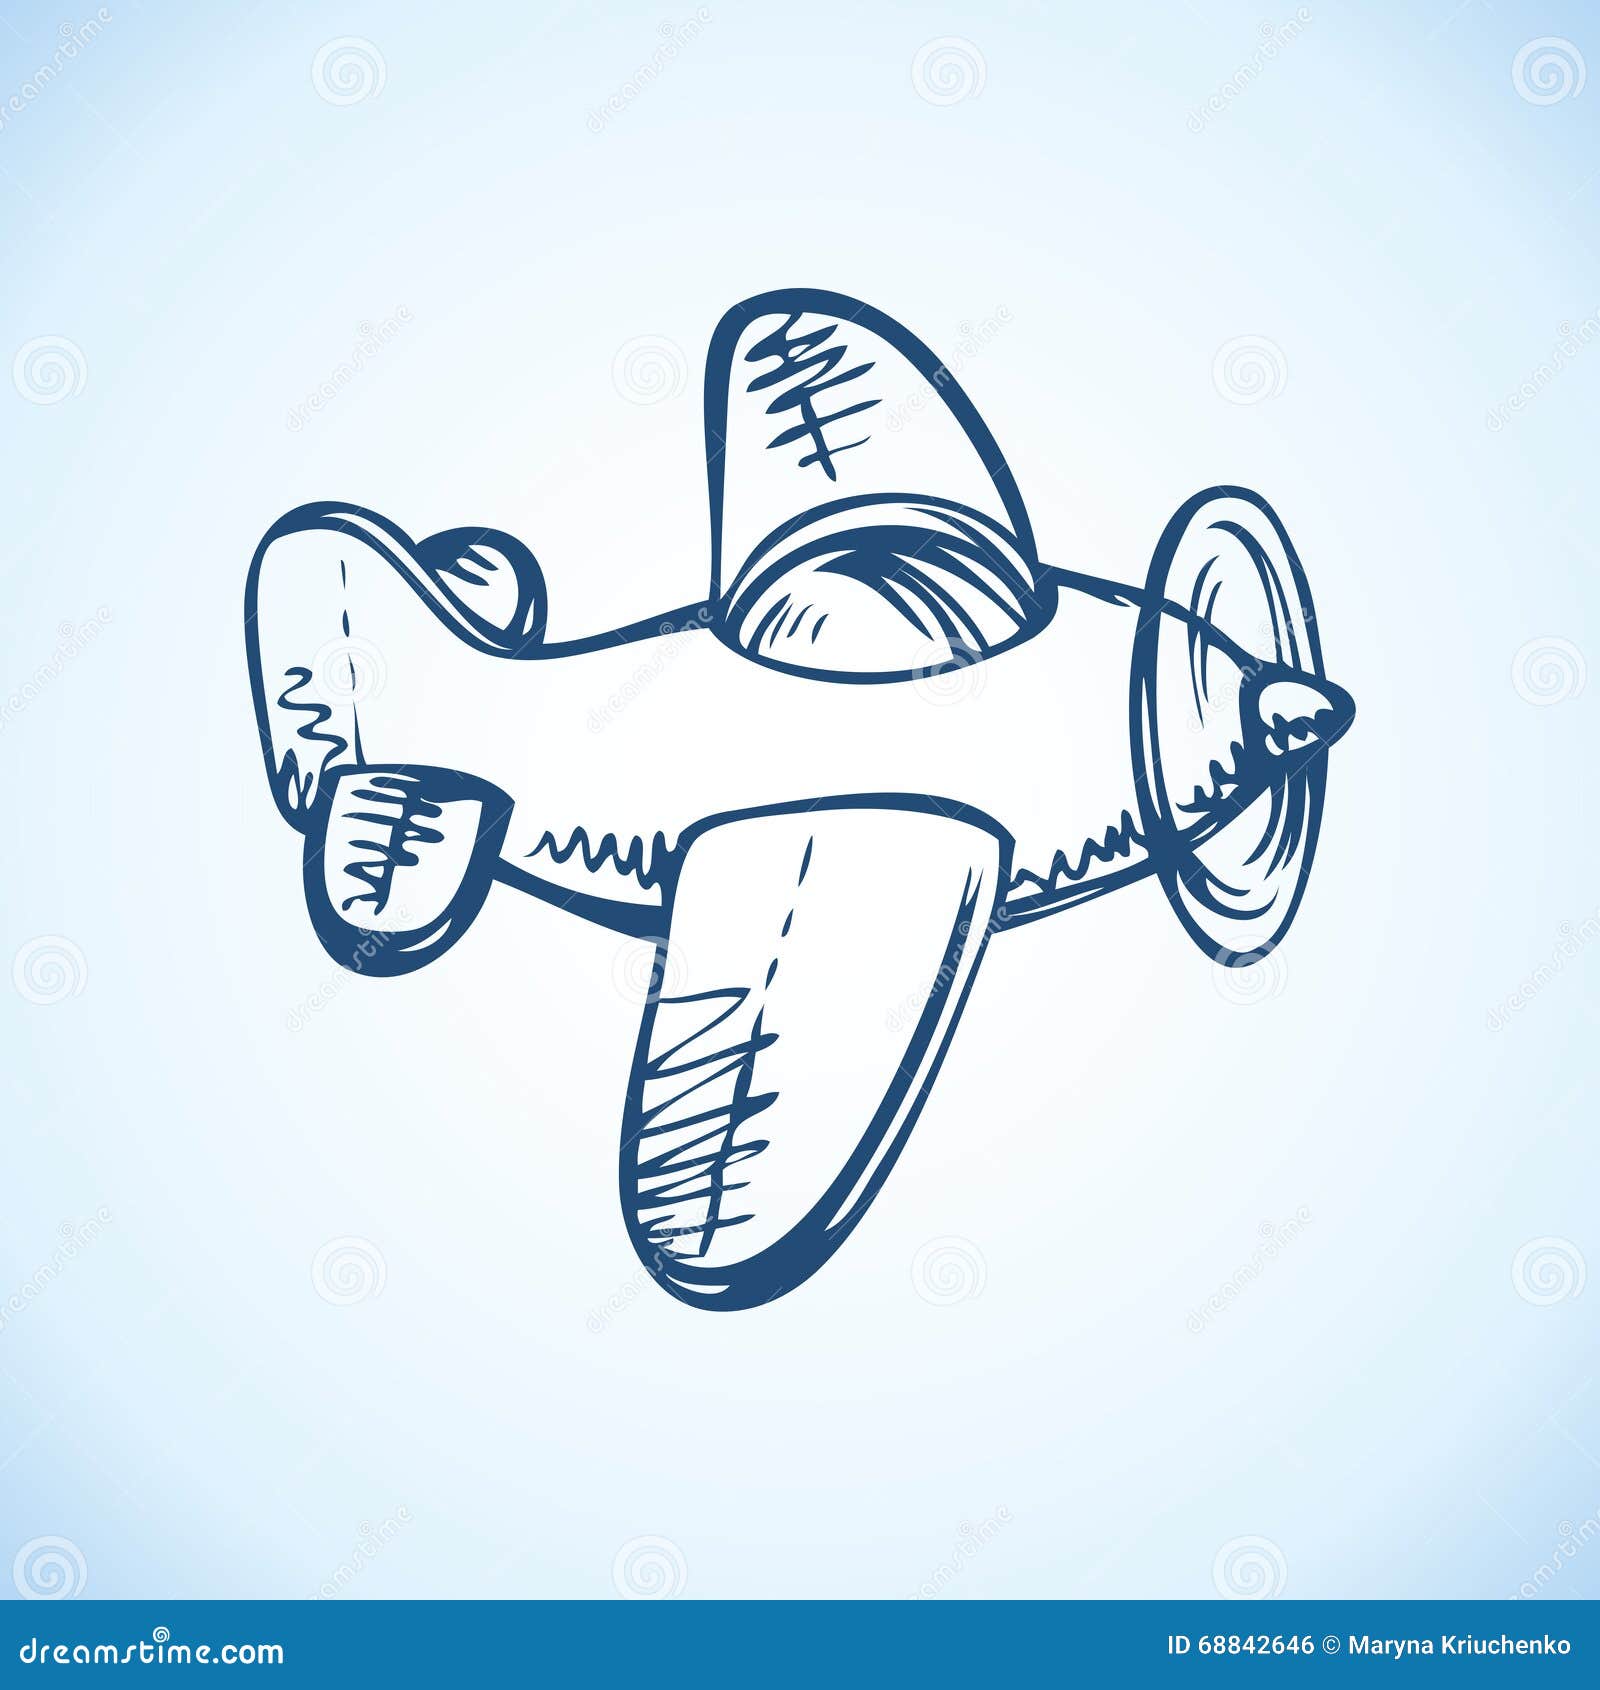 100000 Airplane drawing Vector Images  Depositphotos